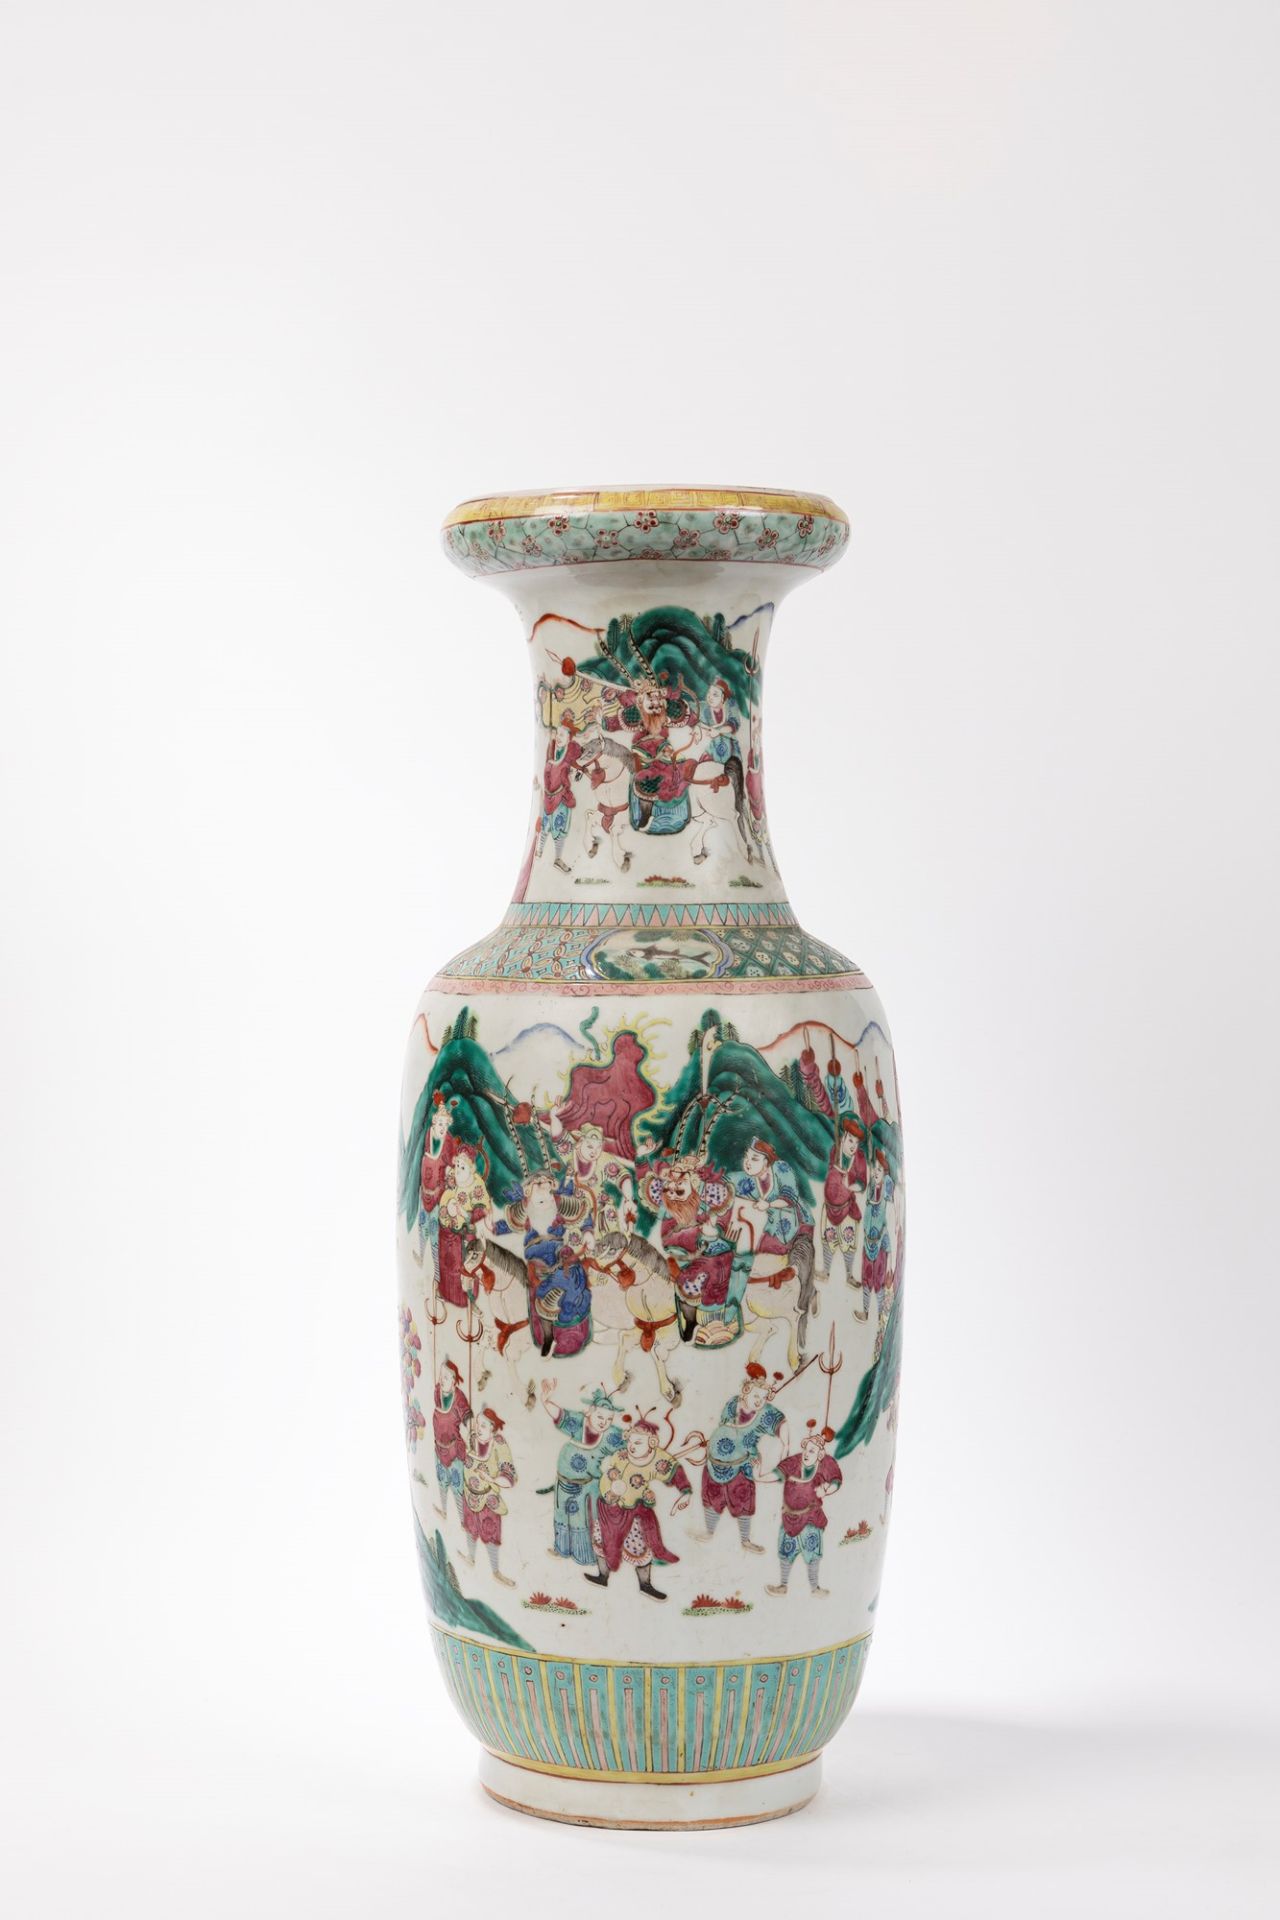 A LARGE FAMILLE ROSE PORCELAIN VASE, China, Qing dynasty, late 19th century